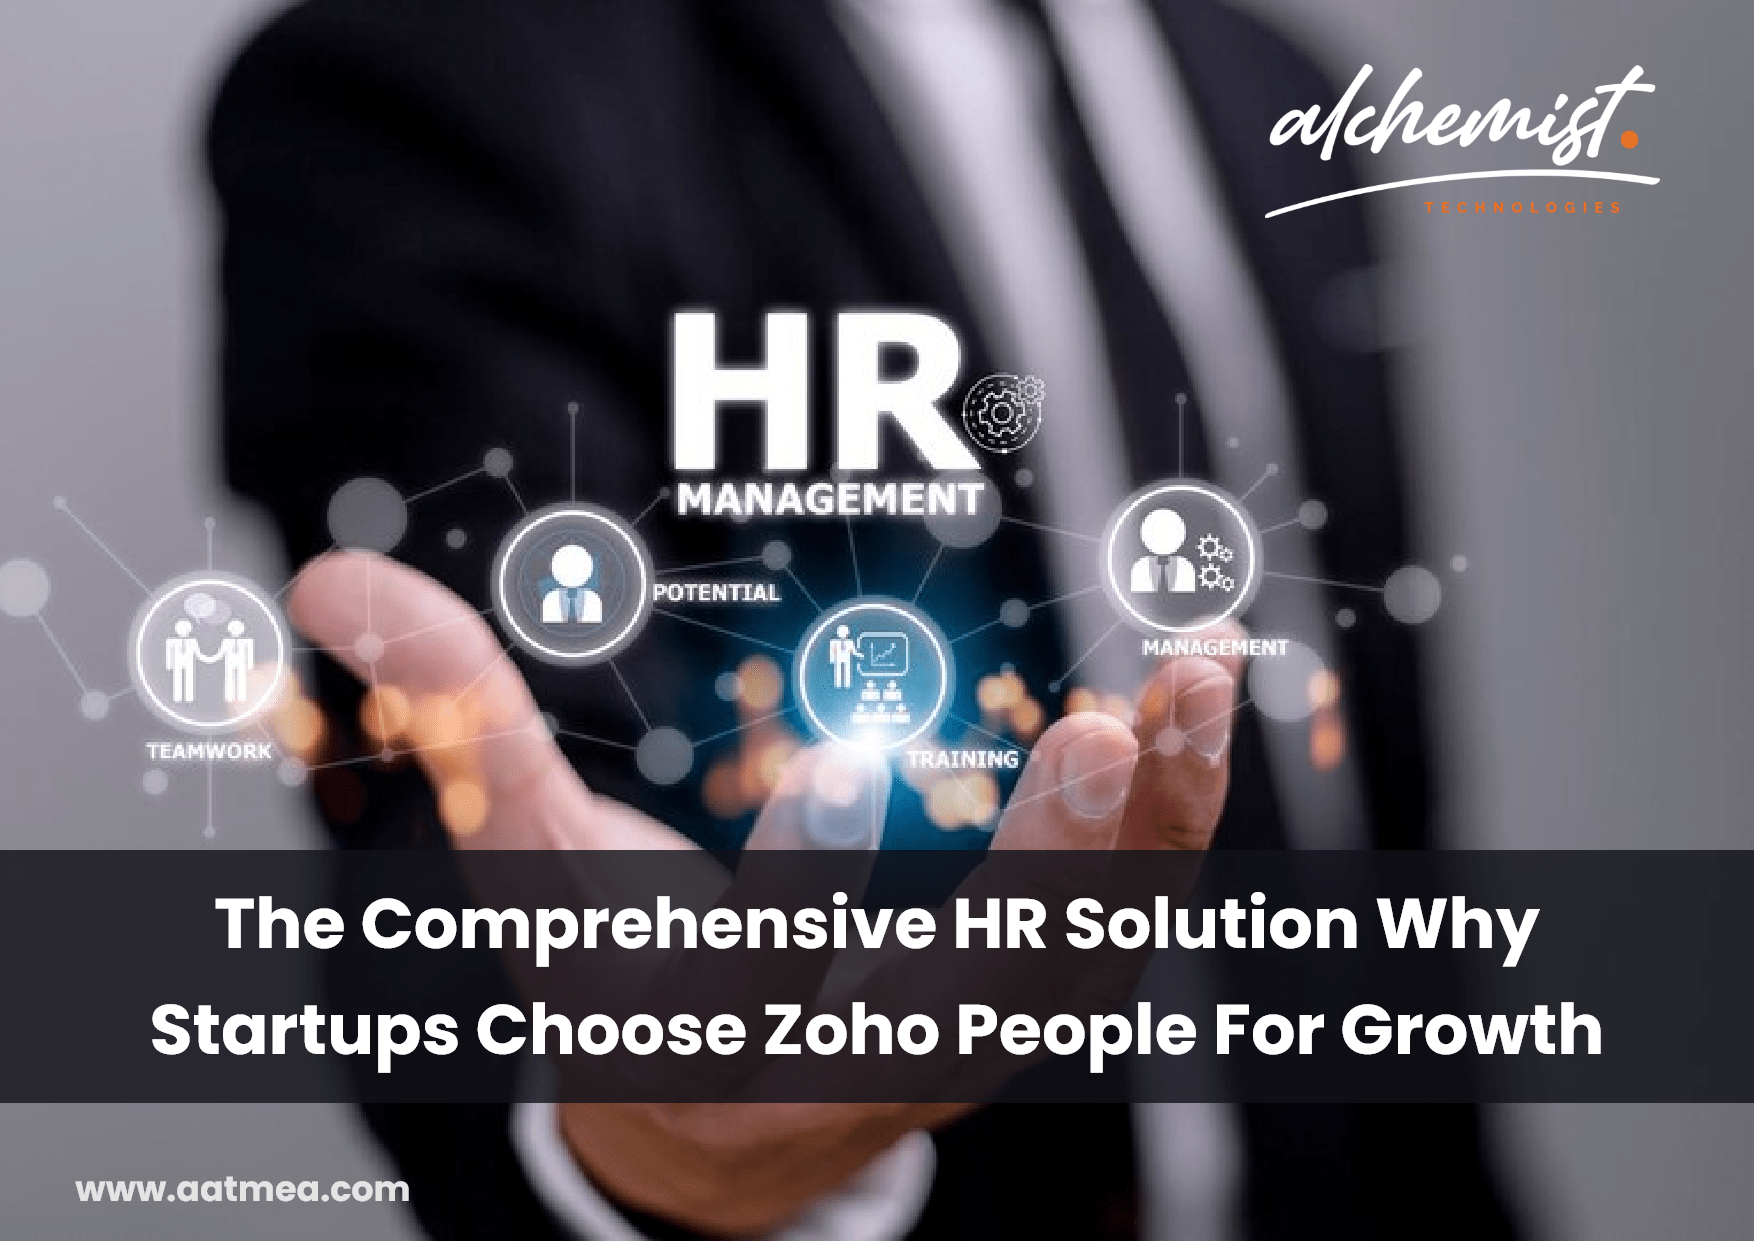 The Comprehensive HR Solution Why Startups Choose Zoho People For Growth